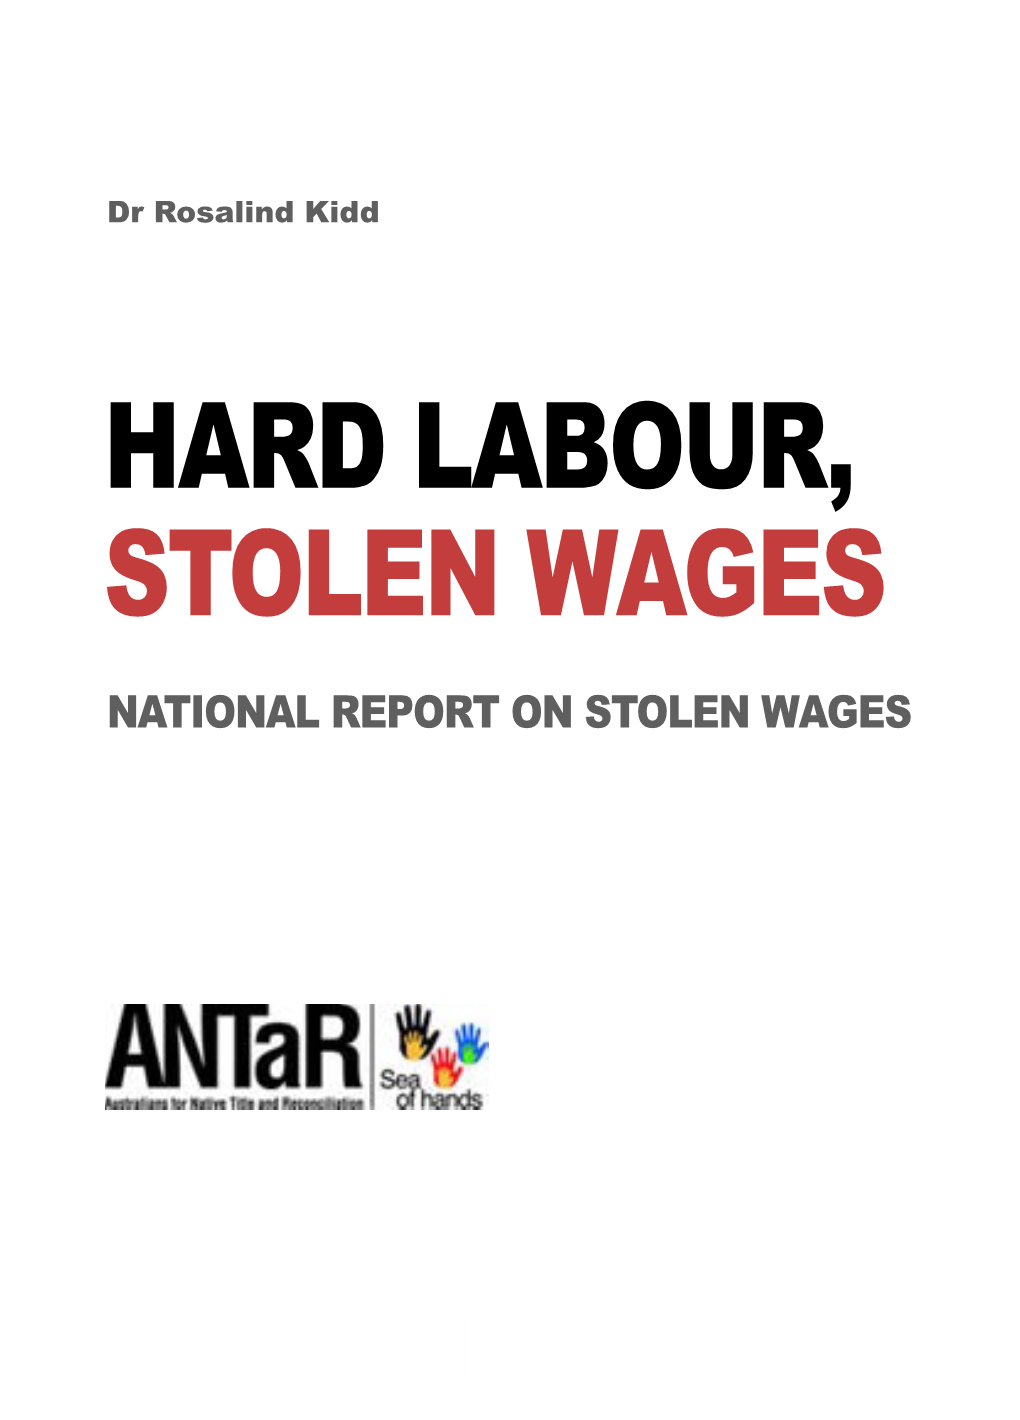 Hard Labour, Stolen Wages National Report on Stolen Wages